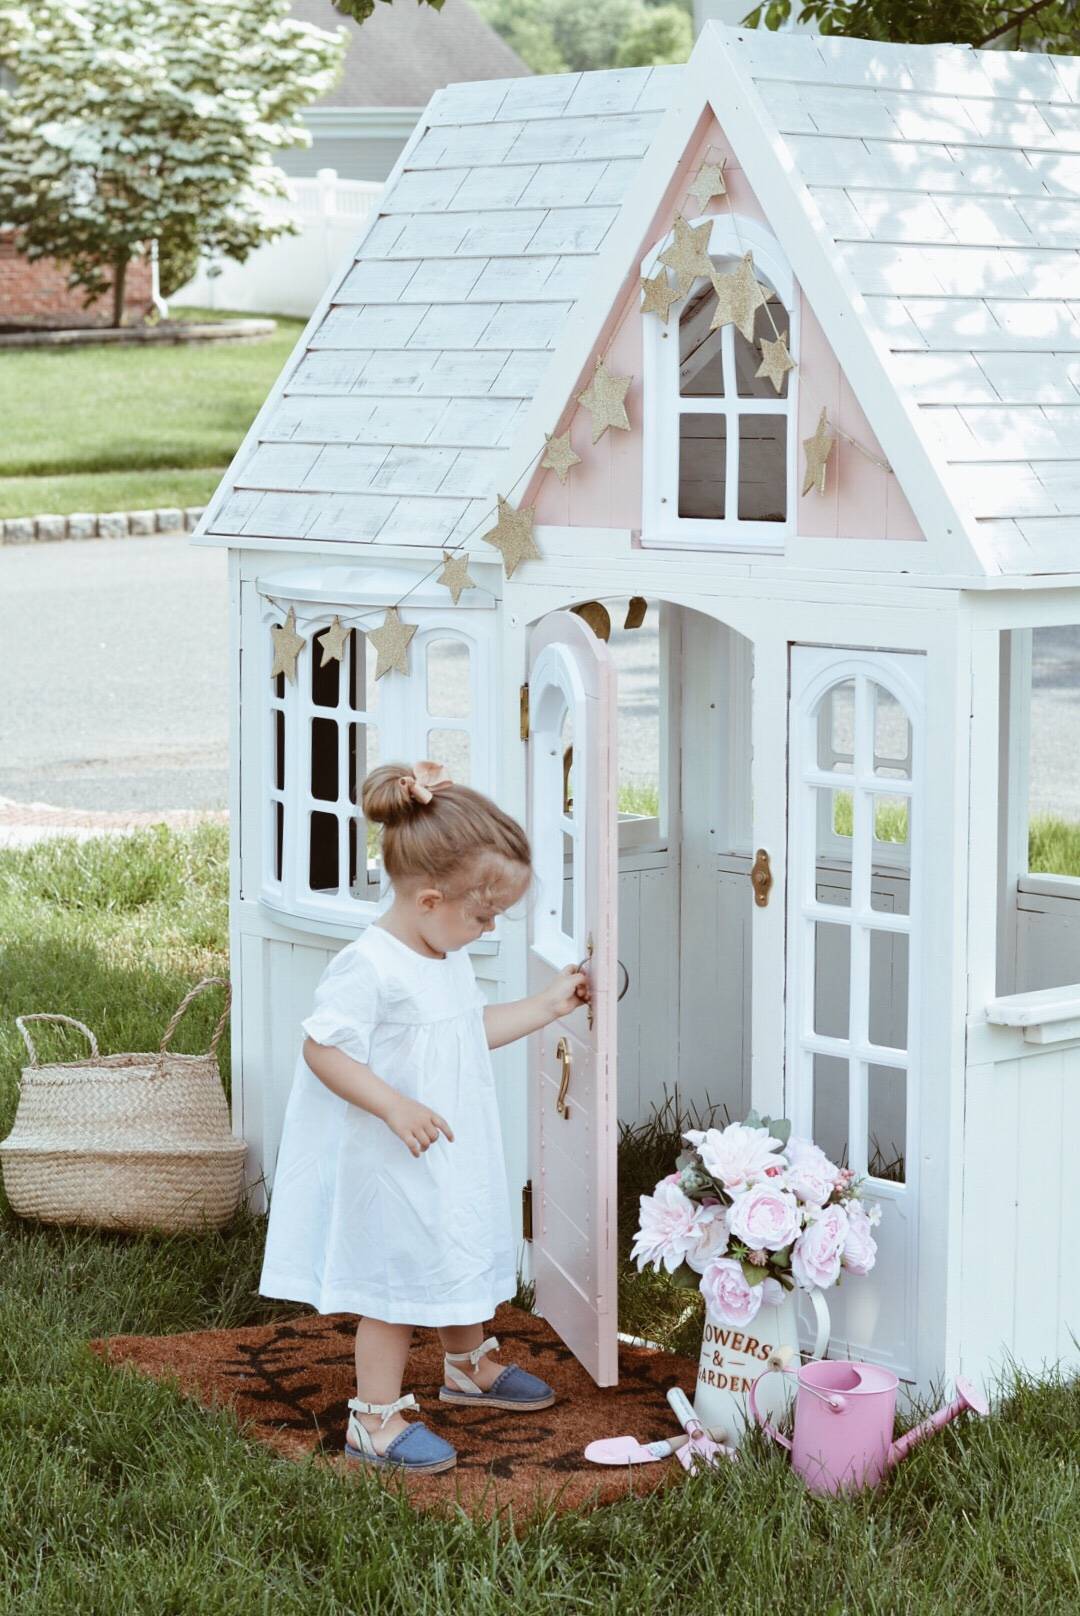 Costco Playhouse Hack How to Transform an Outdoor Cedar Playhouse with